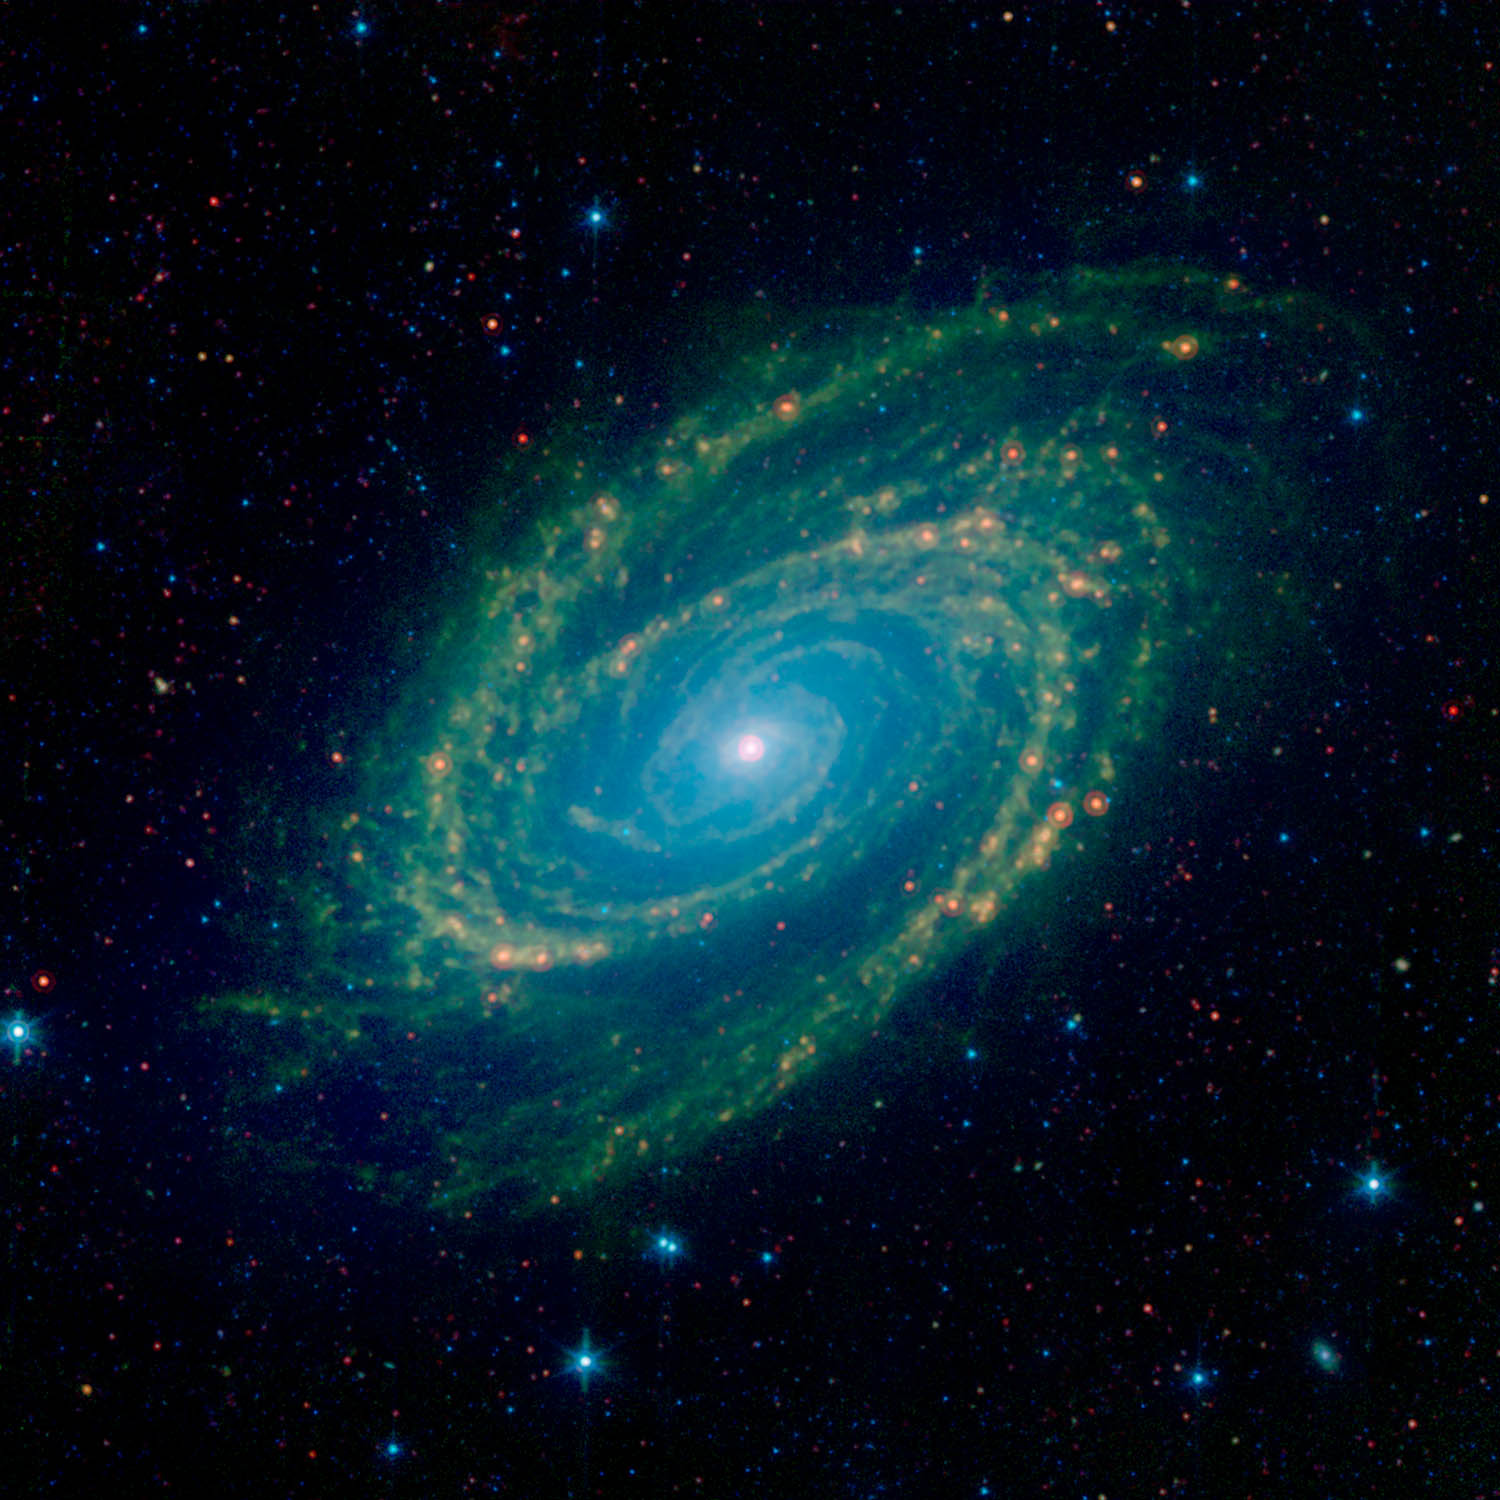 An Infrared View of the M81 Galaxy